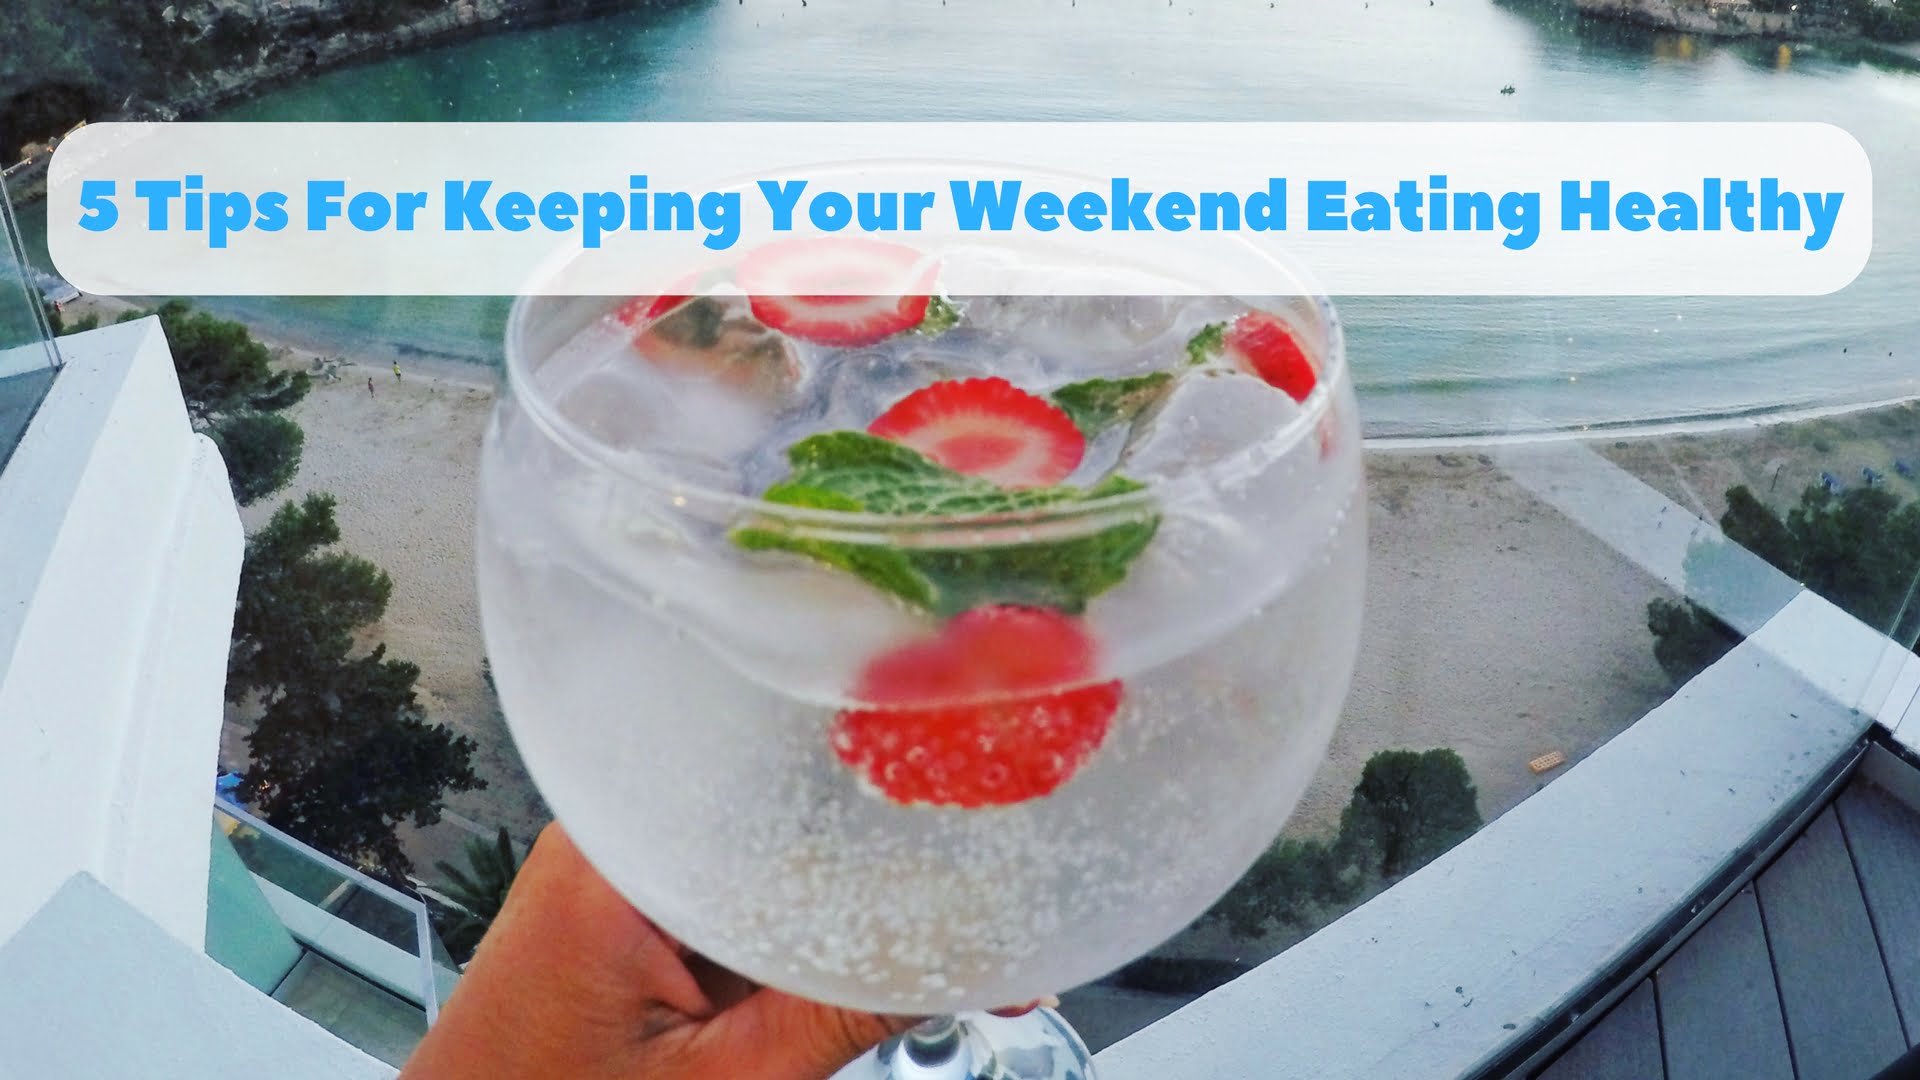 Does Your Healthy Eating Fall Apart On The Weekend? Try My Top 5 Tips To Keep Your Weekend Eating Healthy